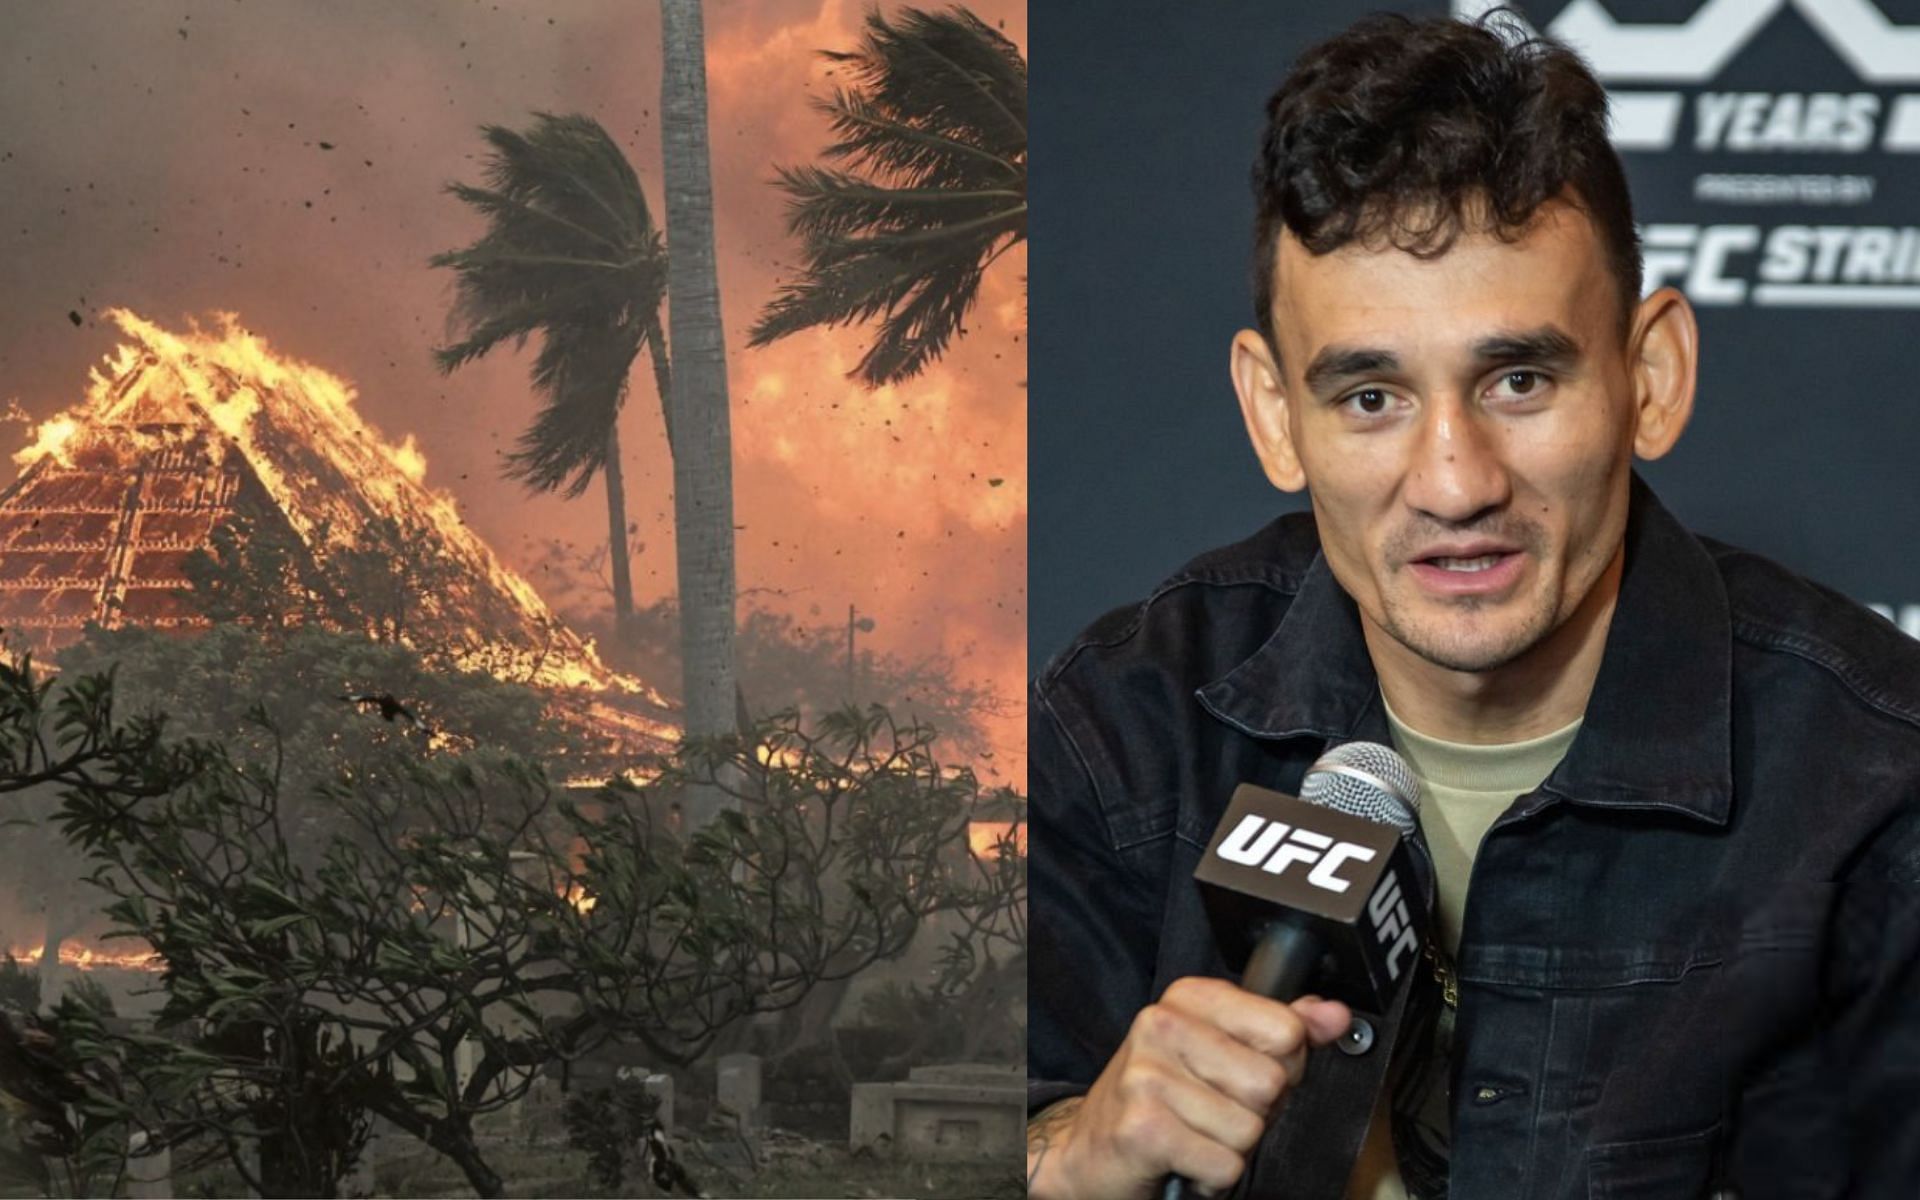 Lahaina fires (left) and Max Holloway (right) [Images Courtesy: @lahainastrong2023 on Instagram and @GettyImages]